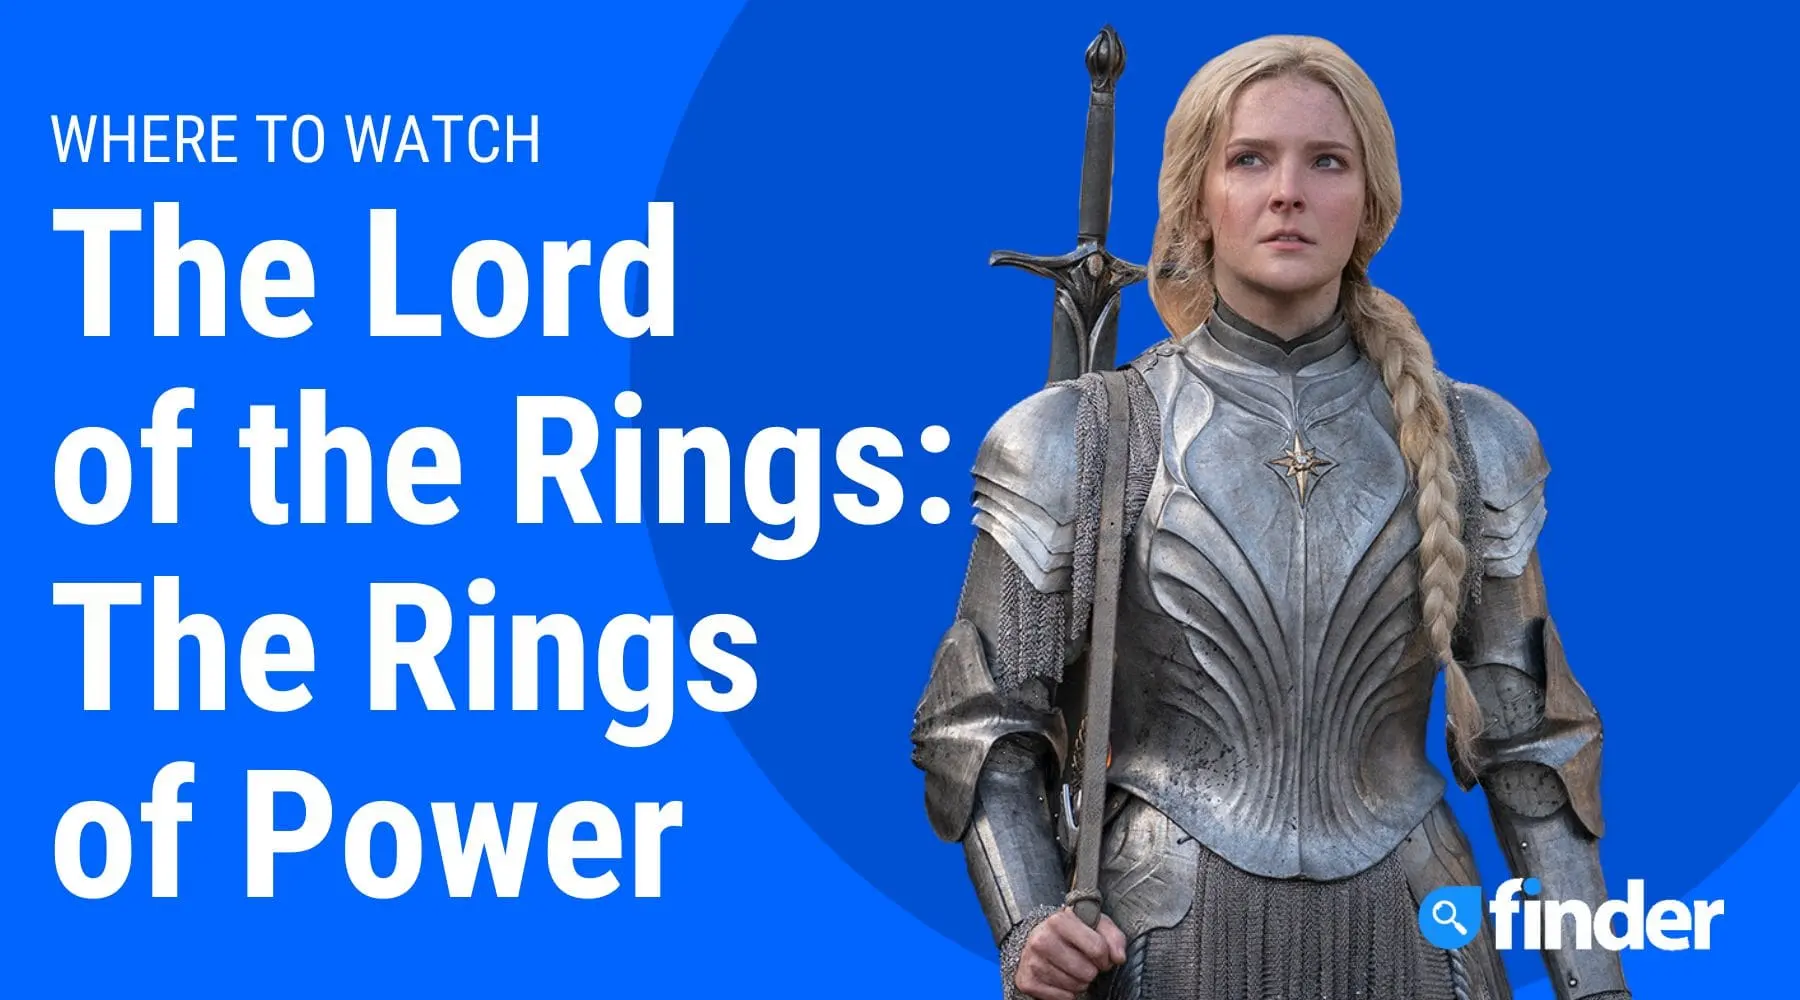 How to Watch 'The Lord of the Rings: The Rings of Power' for Free